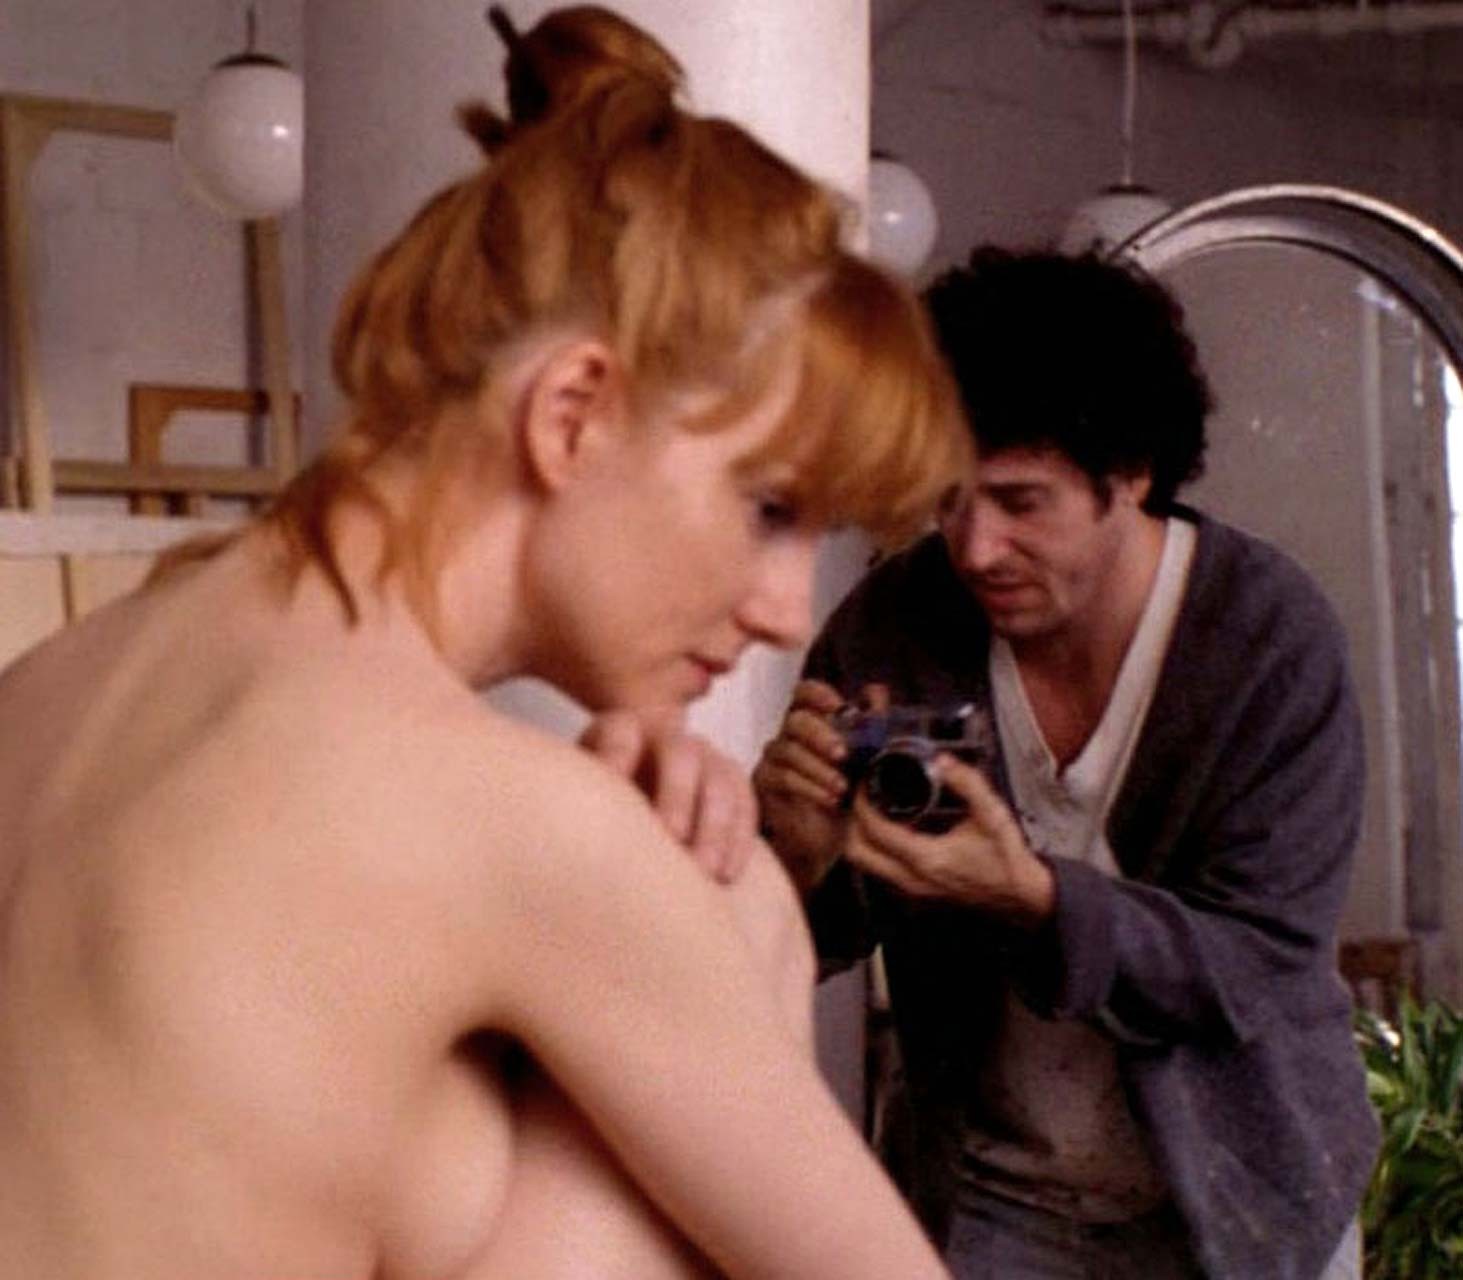 Laura Linney showing her nice tits and hairy pussy in nude movie scene #75336079